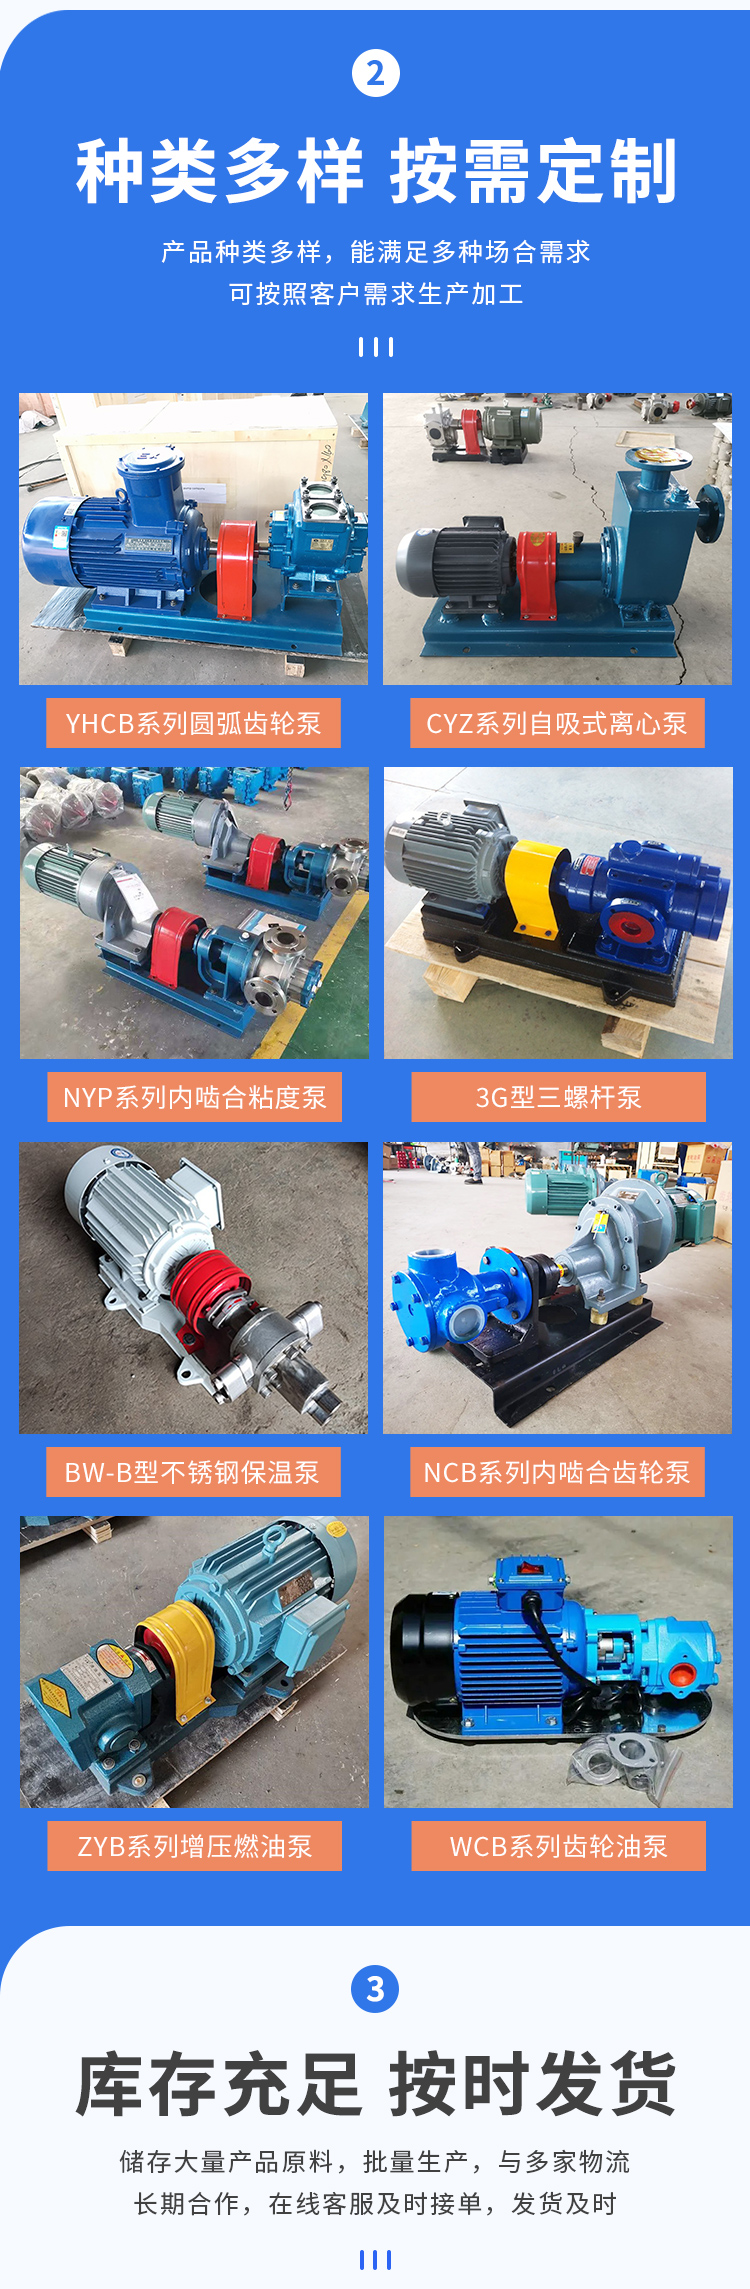 KCB asphalt insulation pump stainless steel insulation heavy oil pump jacket rosin pump customized according to needs